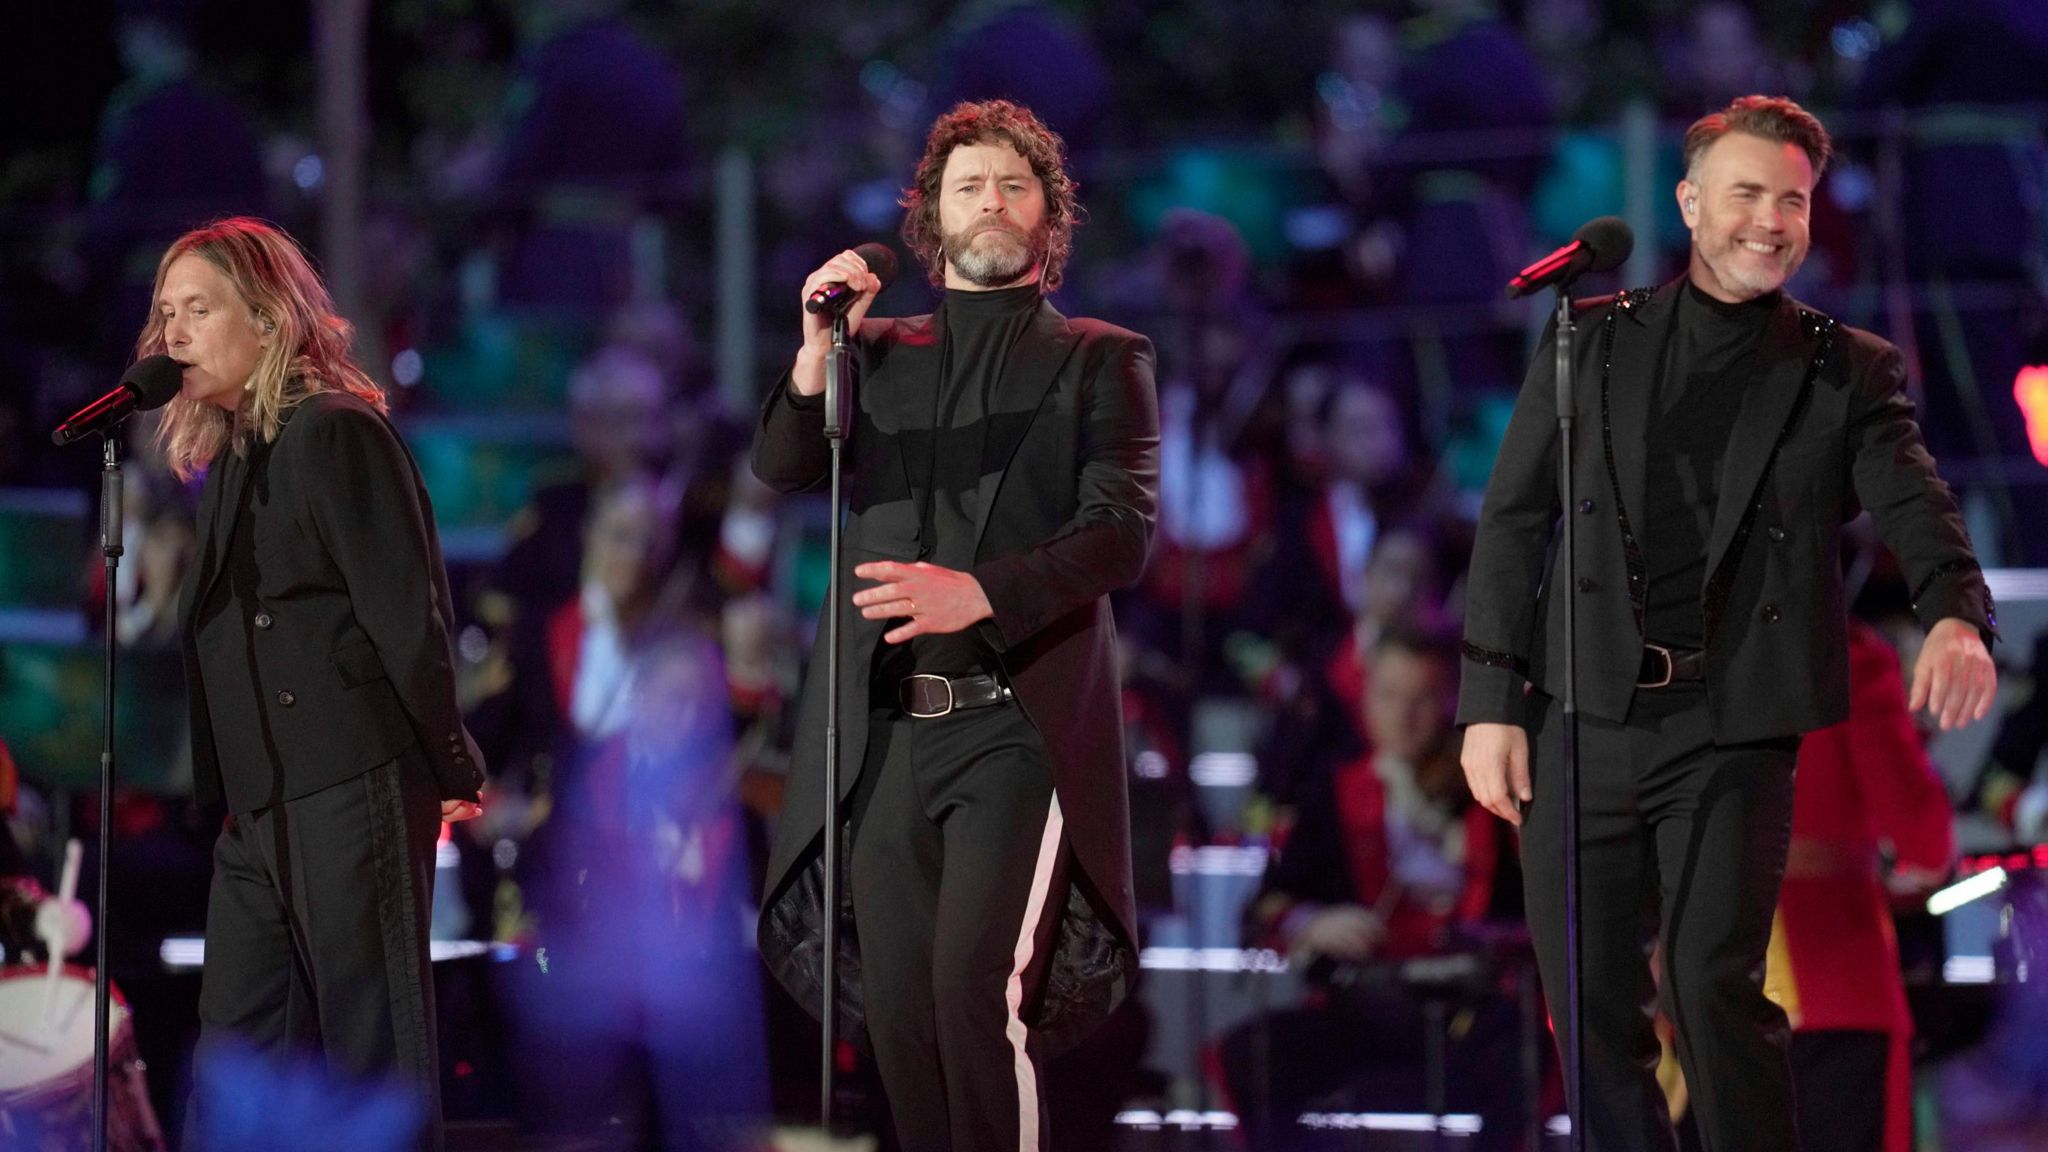 Take That at the King's Coronation